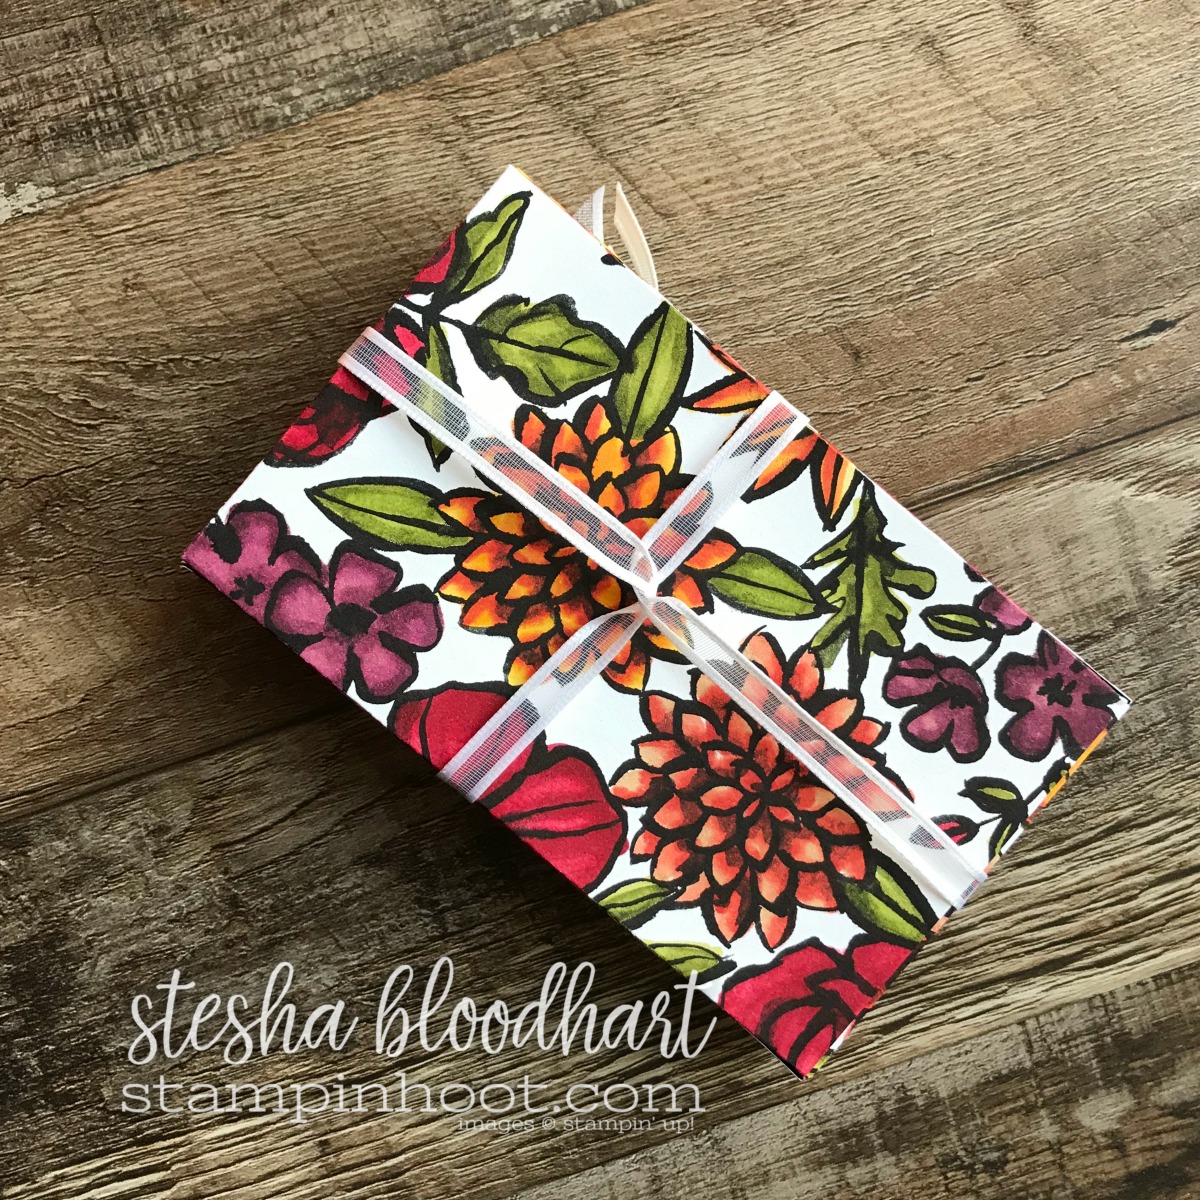 Petal Passion Designer Series Paper Colored with Stampin' Blends Premier Alcohol Markers. Box Created with Lots to Love Box Framelits Dies. #stampinhoot #steshabloodhart #lotstolove #petalpassion #stampinblends